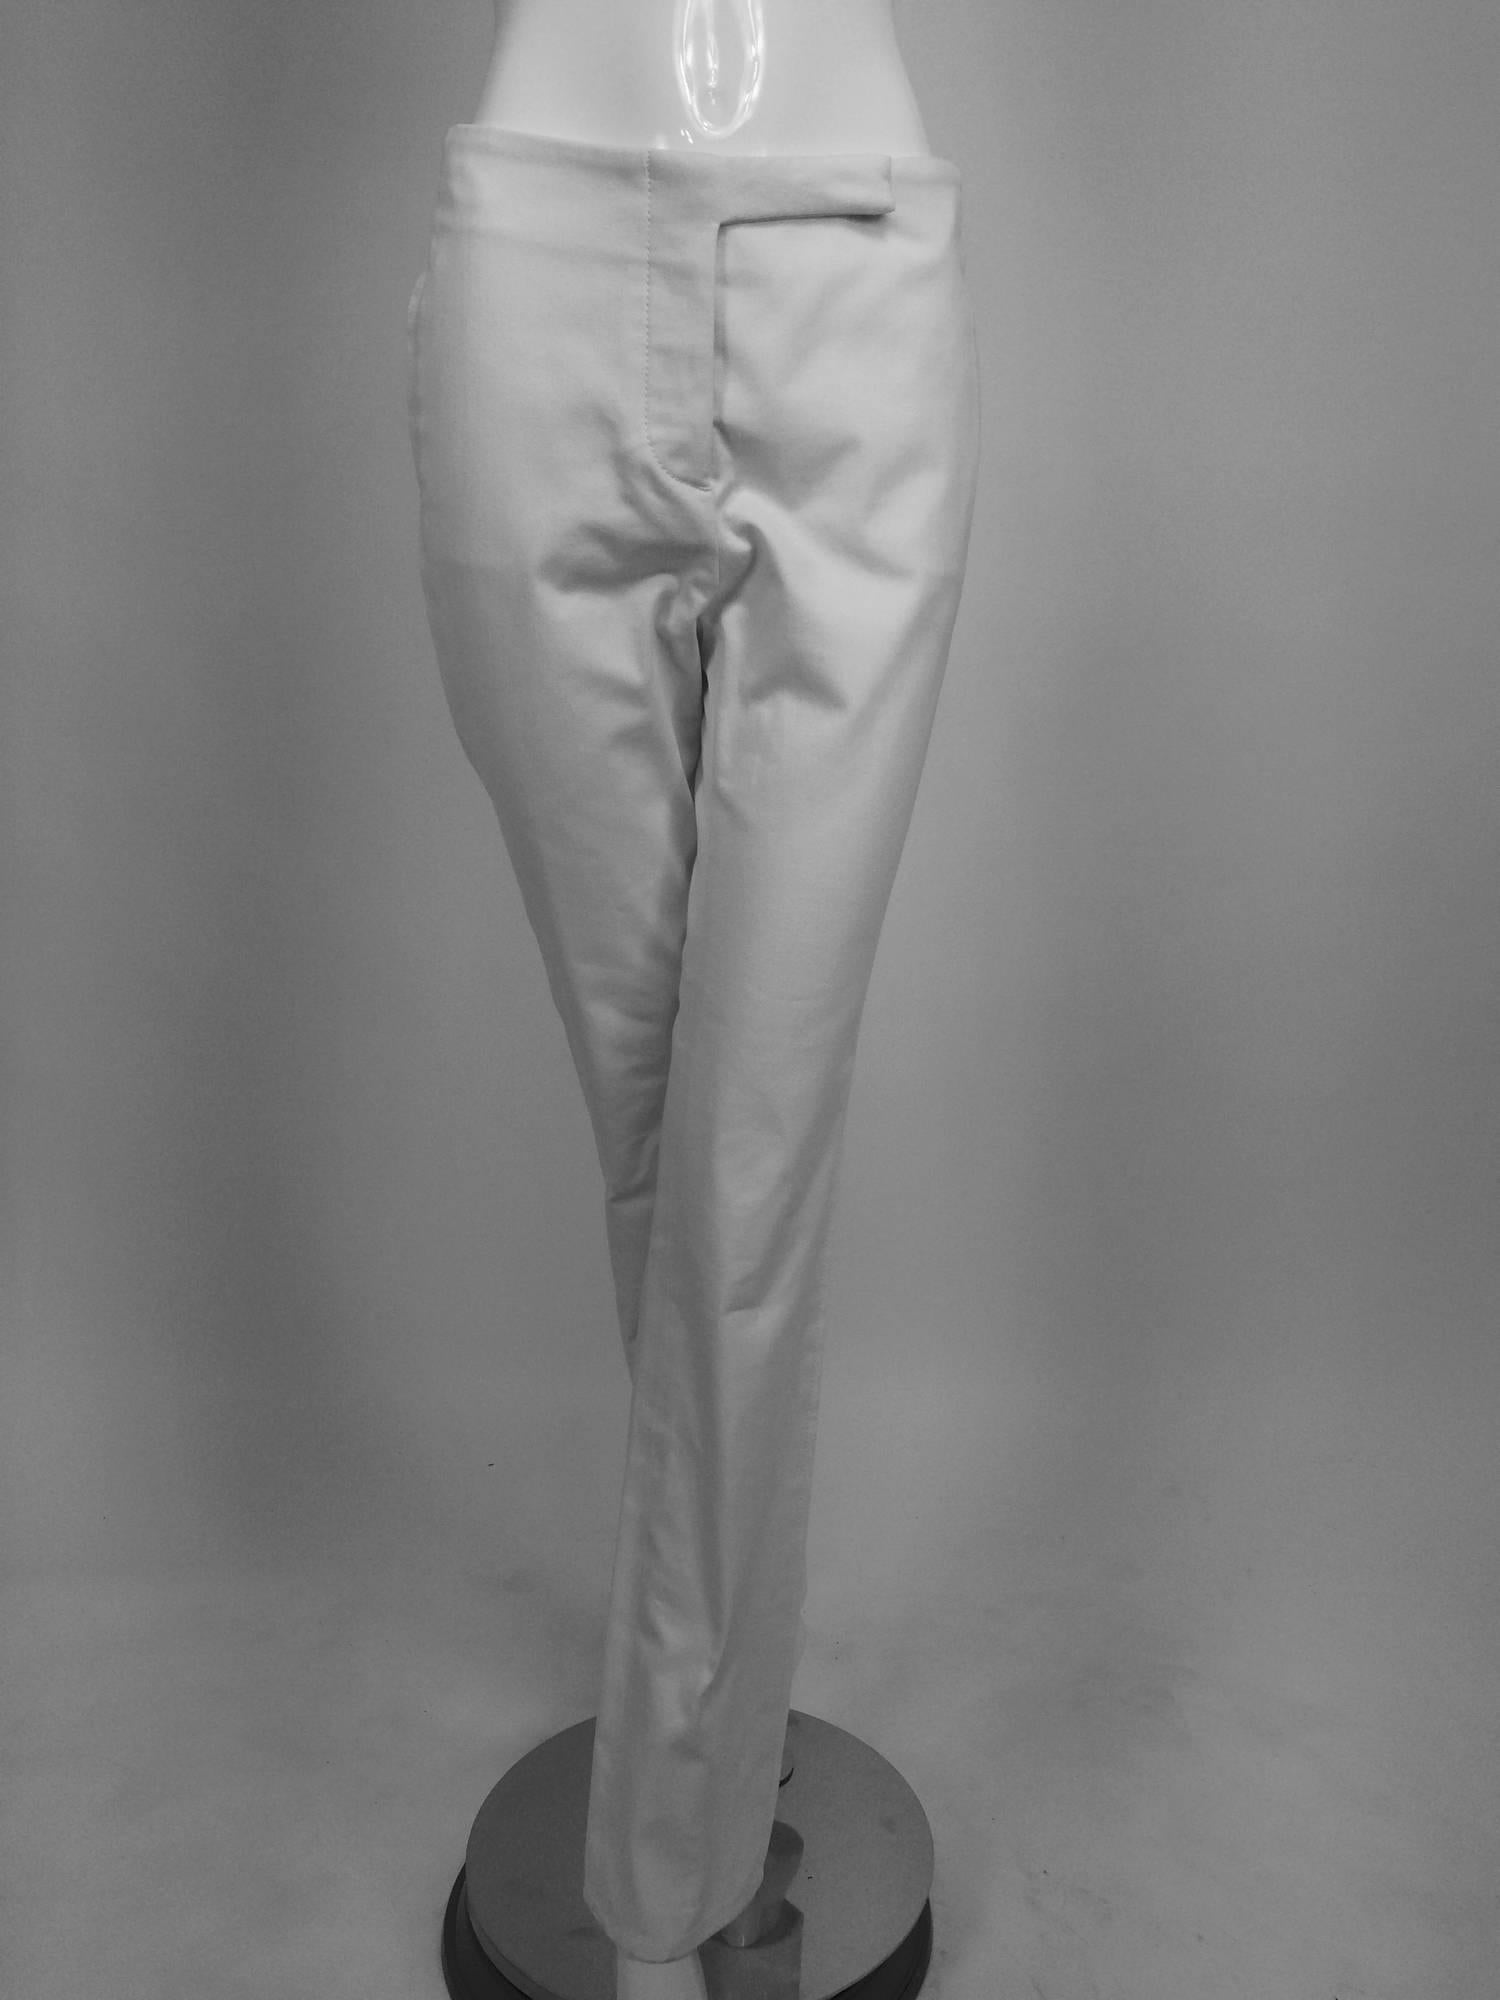 Chanel white cotton twill trousers...Fly front with hidden waist closure...Flat front with faux side pockets...The waist back has an adjustable silver buckle...The legs taper slightly at the hem...Unlined...Marked size 38, fits like a size